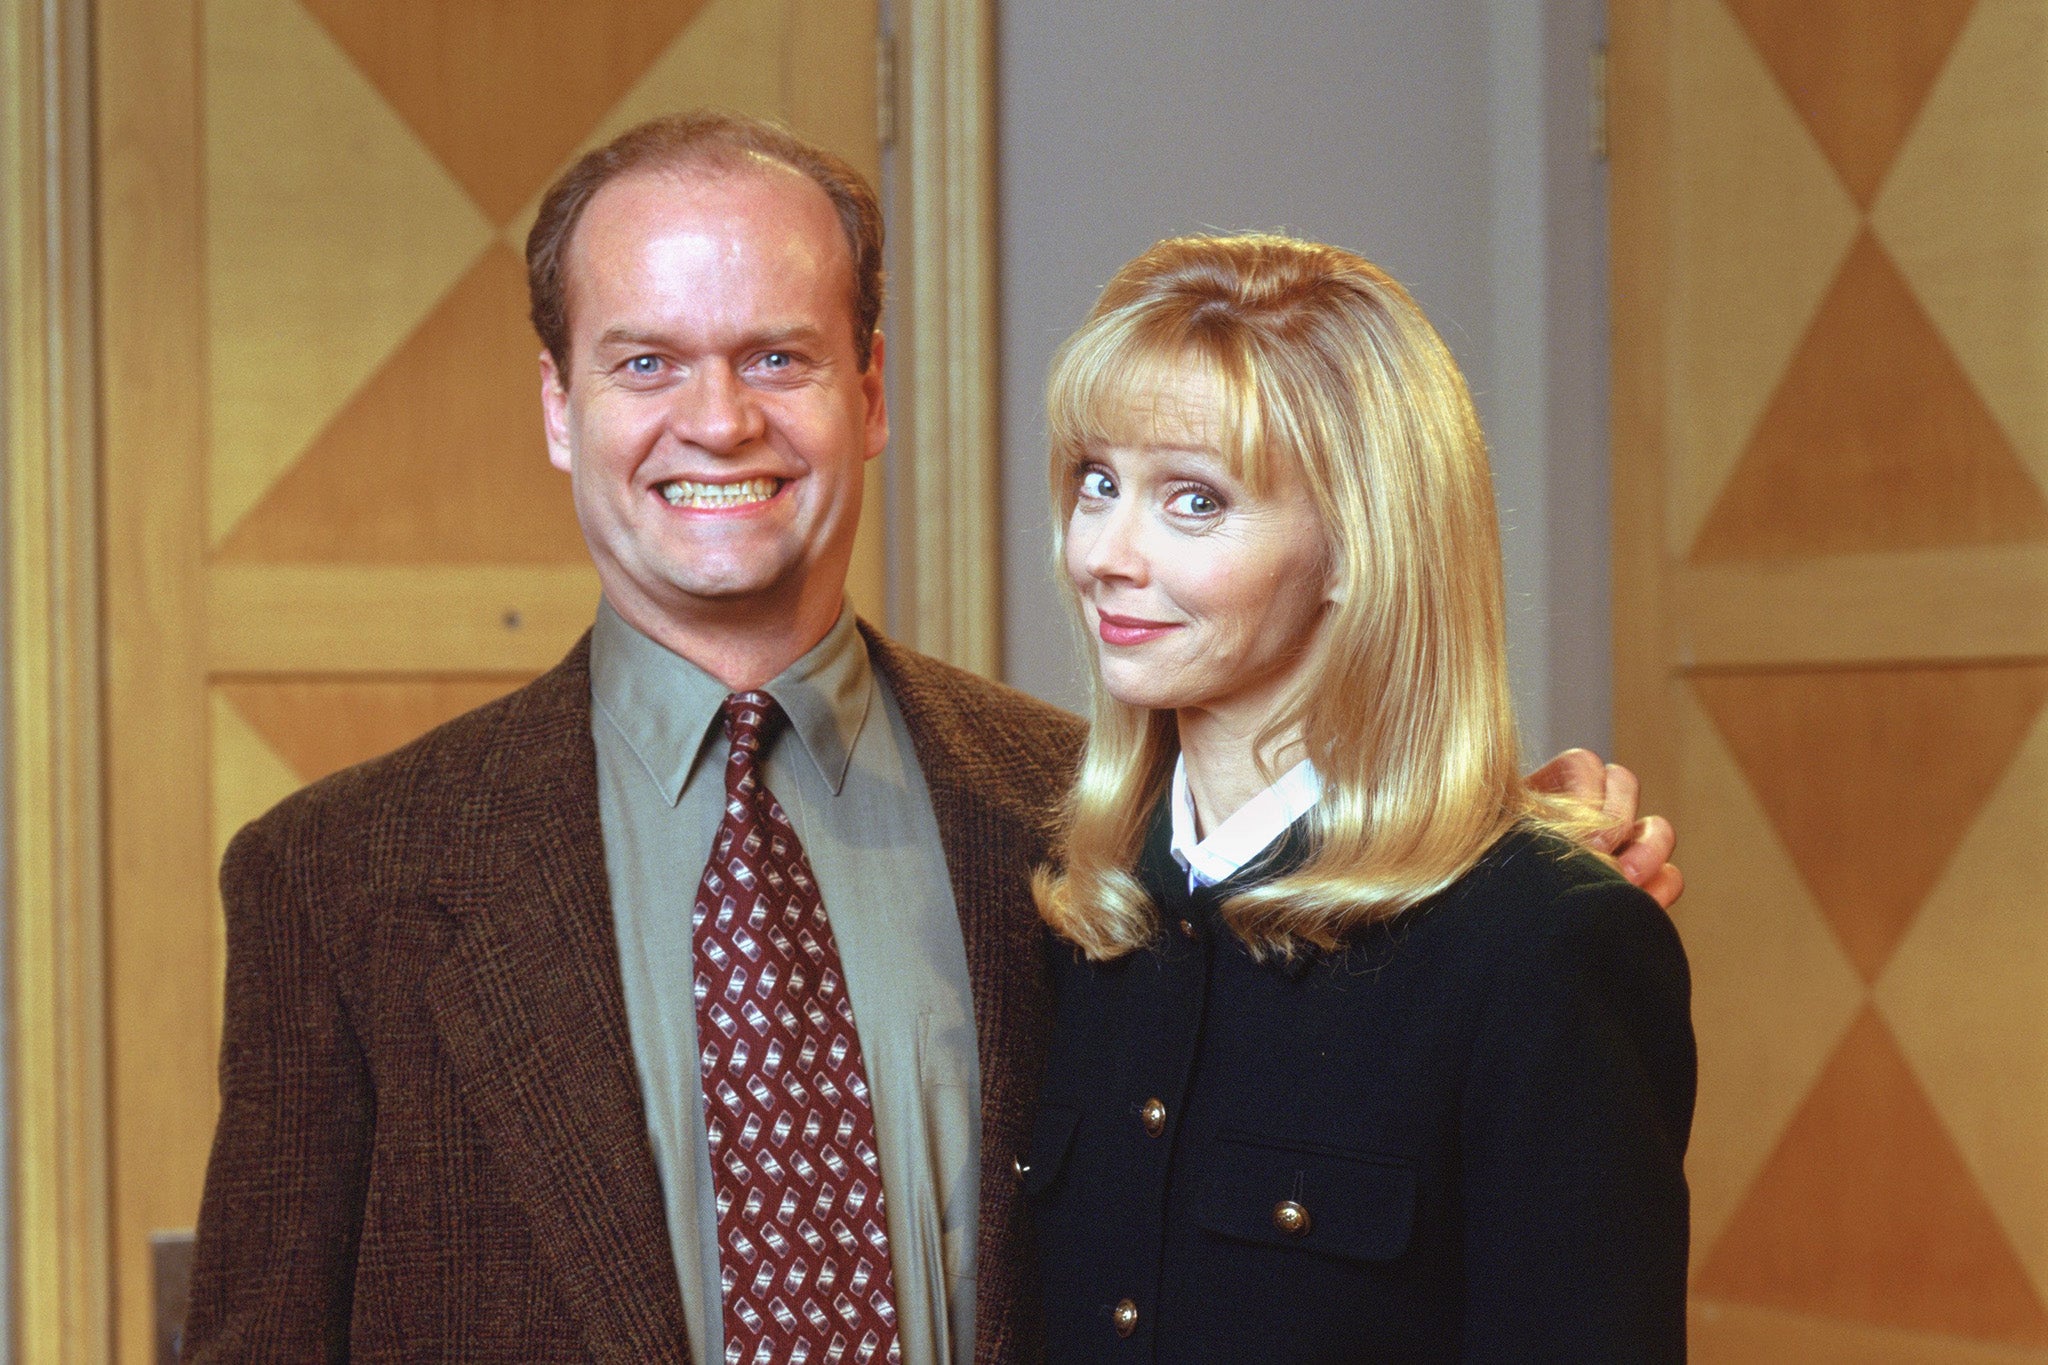 Grammer with Shelley Long in the ‘Frasier’ episode “The Show Where Diane Comes Back”